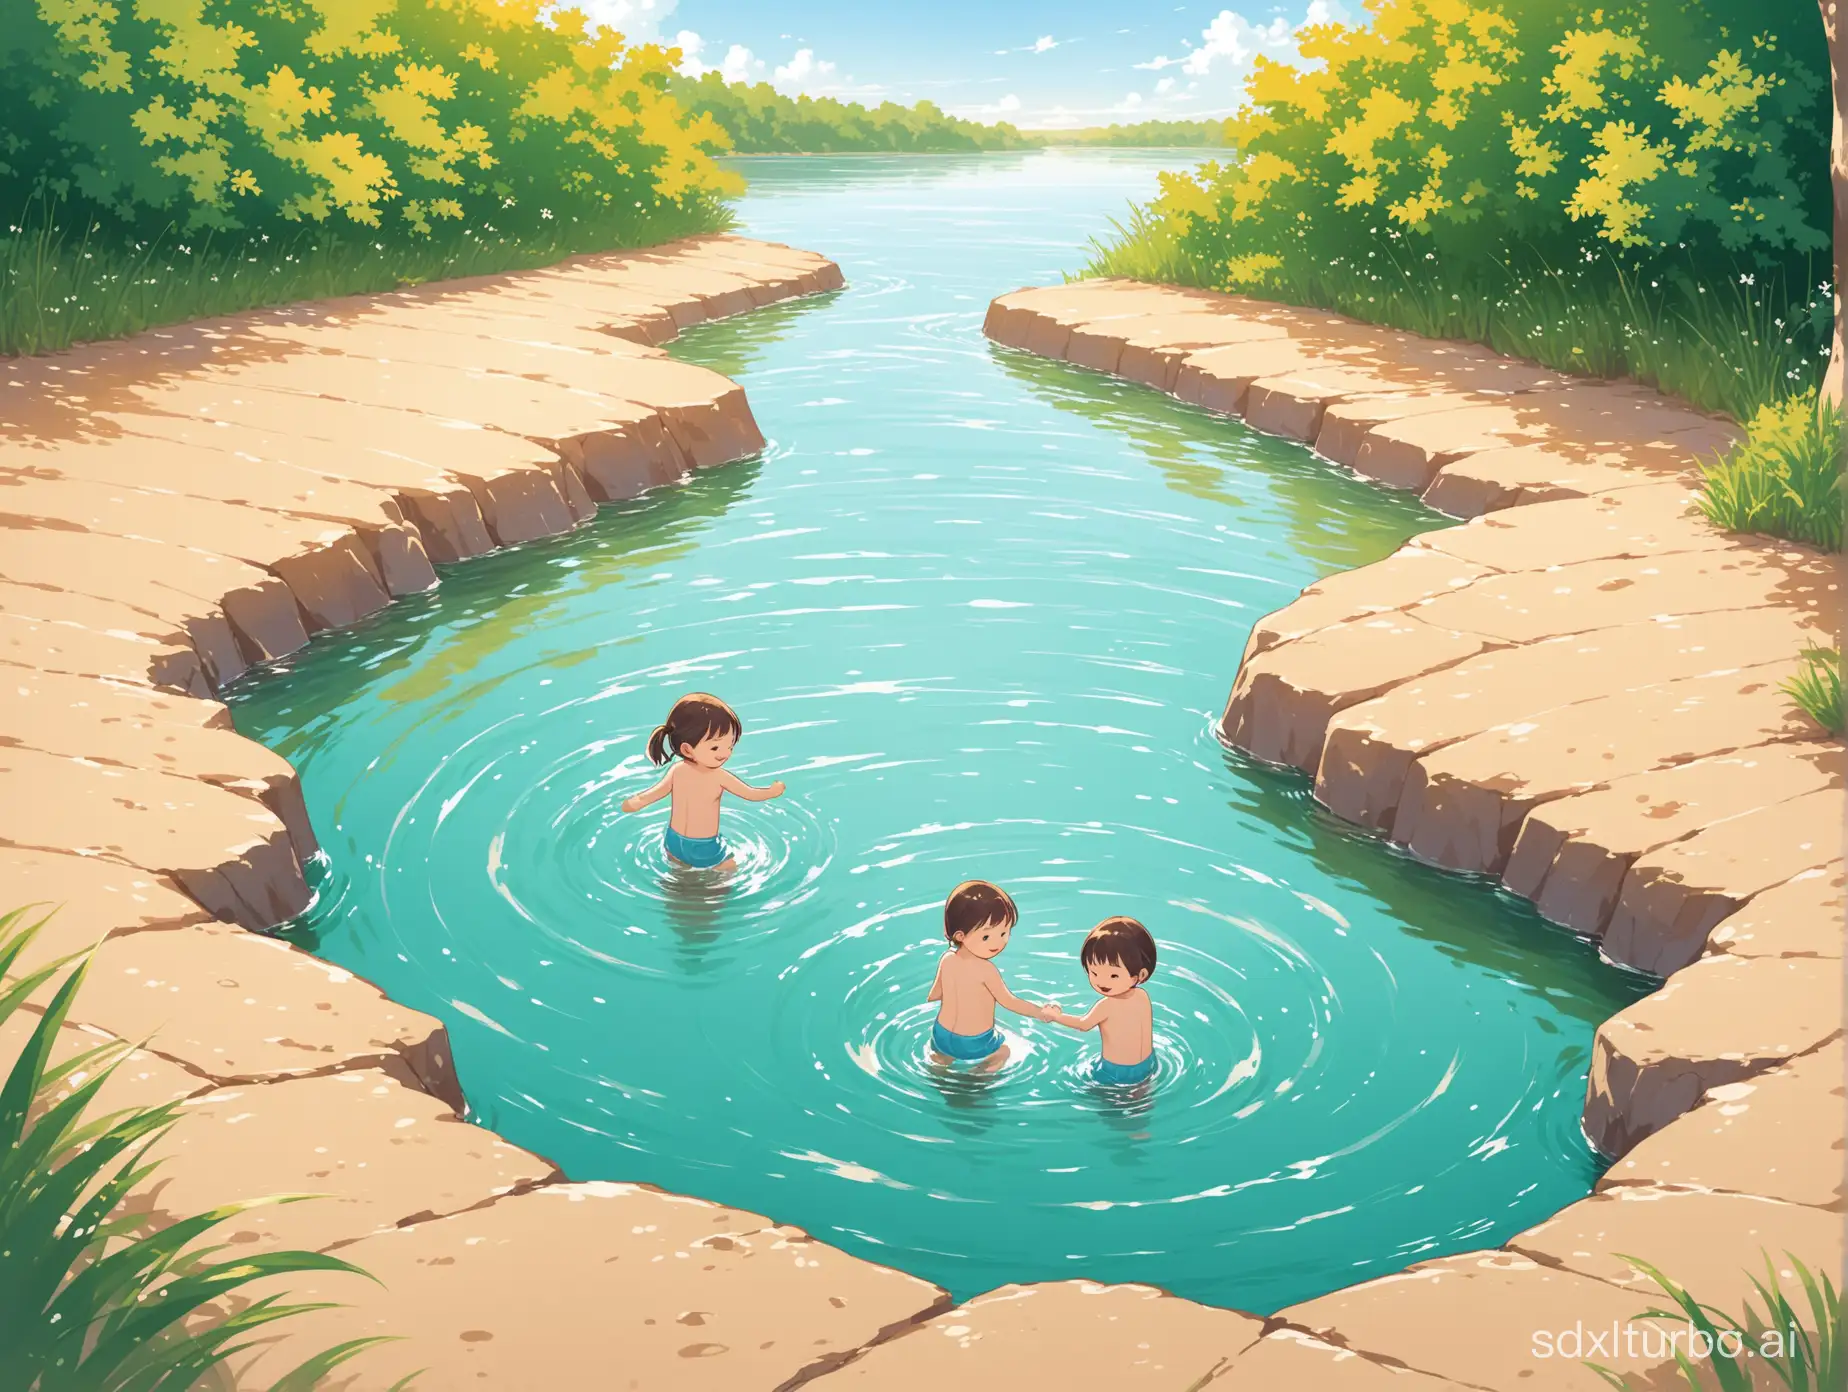 make a picture that depicts two small children playing in the river